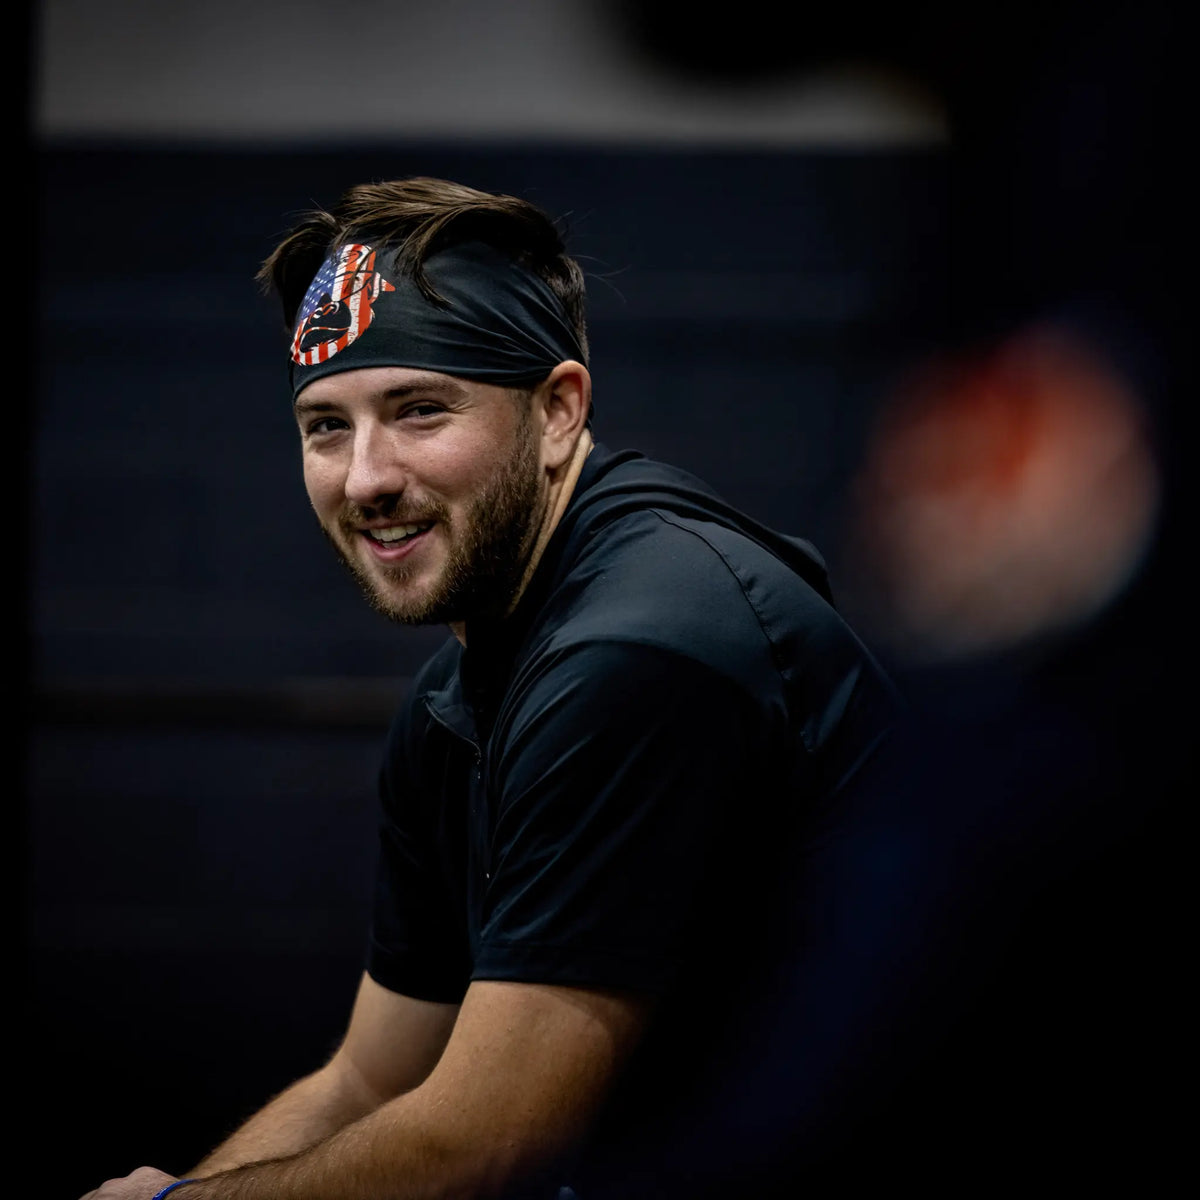 Smiling athlete wearing Tater Baseball&#39;s black headband with a bold USA flag Kong design, providing both performance and patriotic style during training.